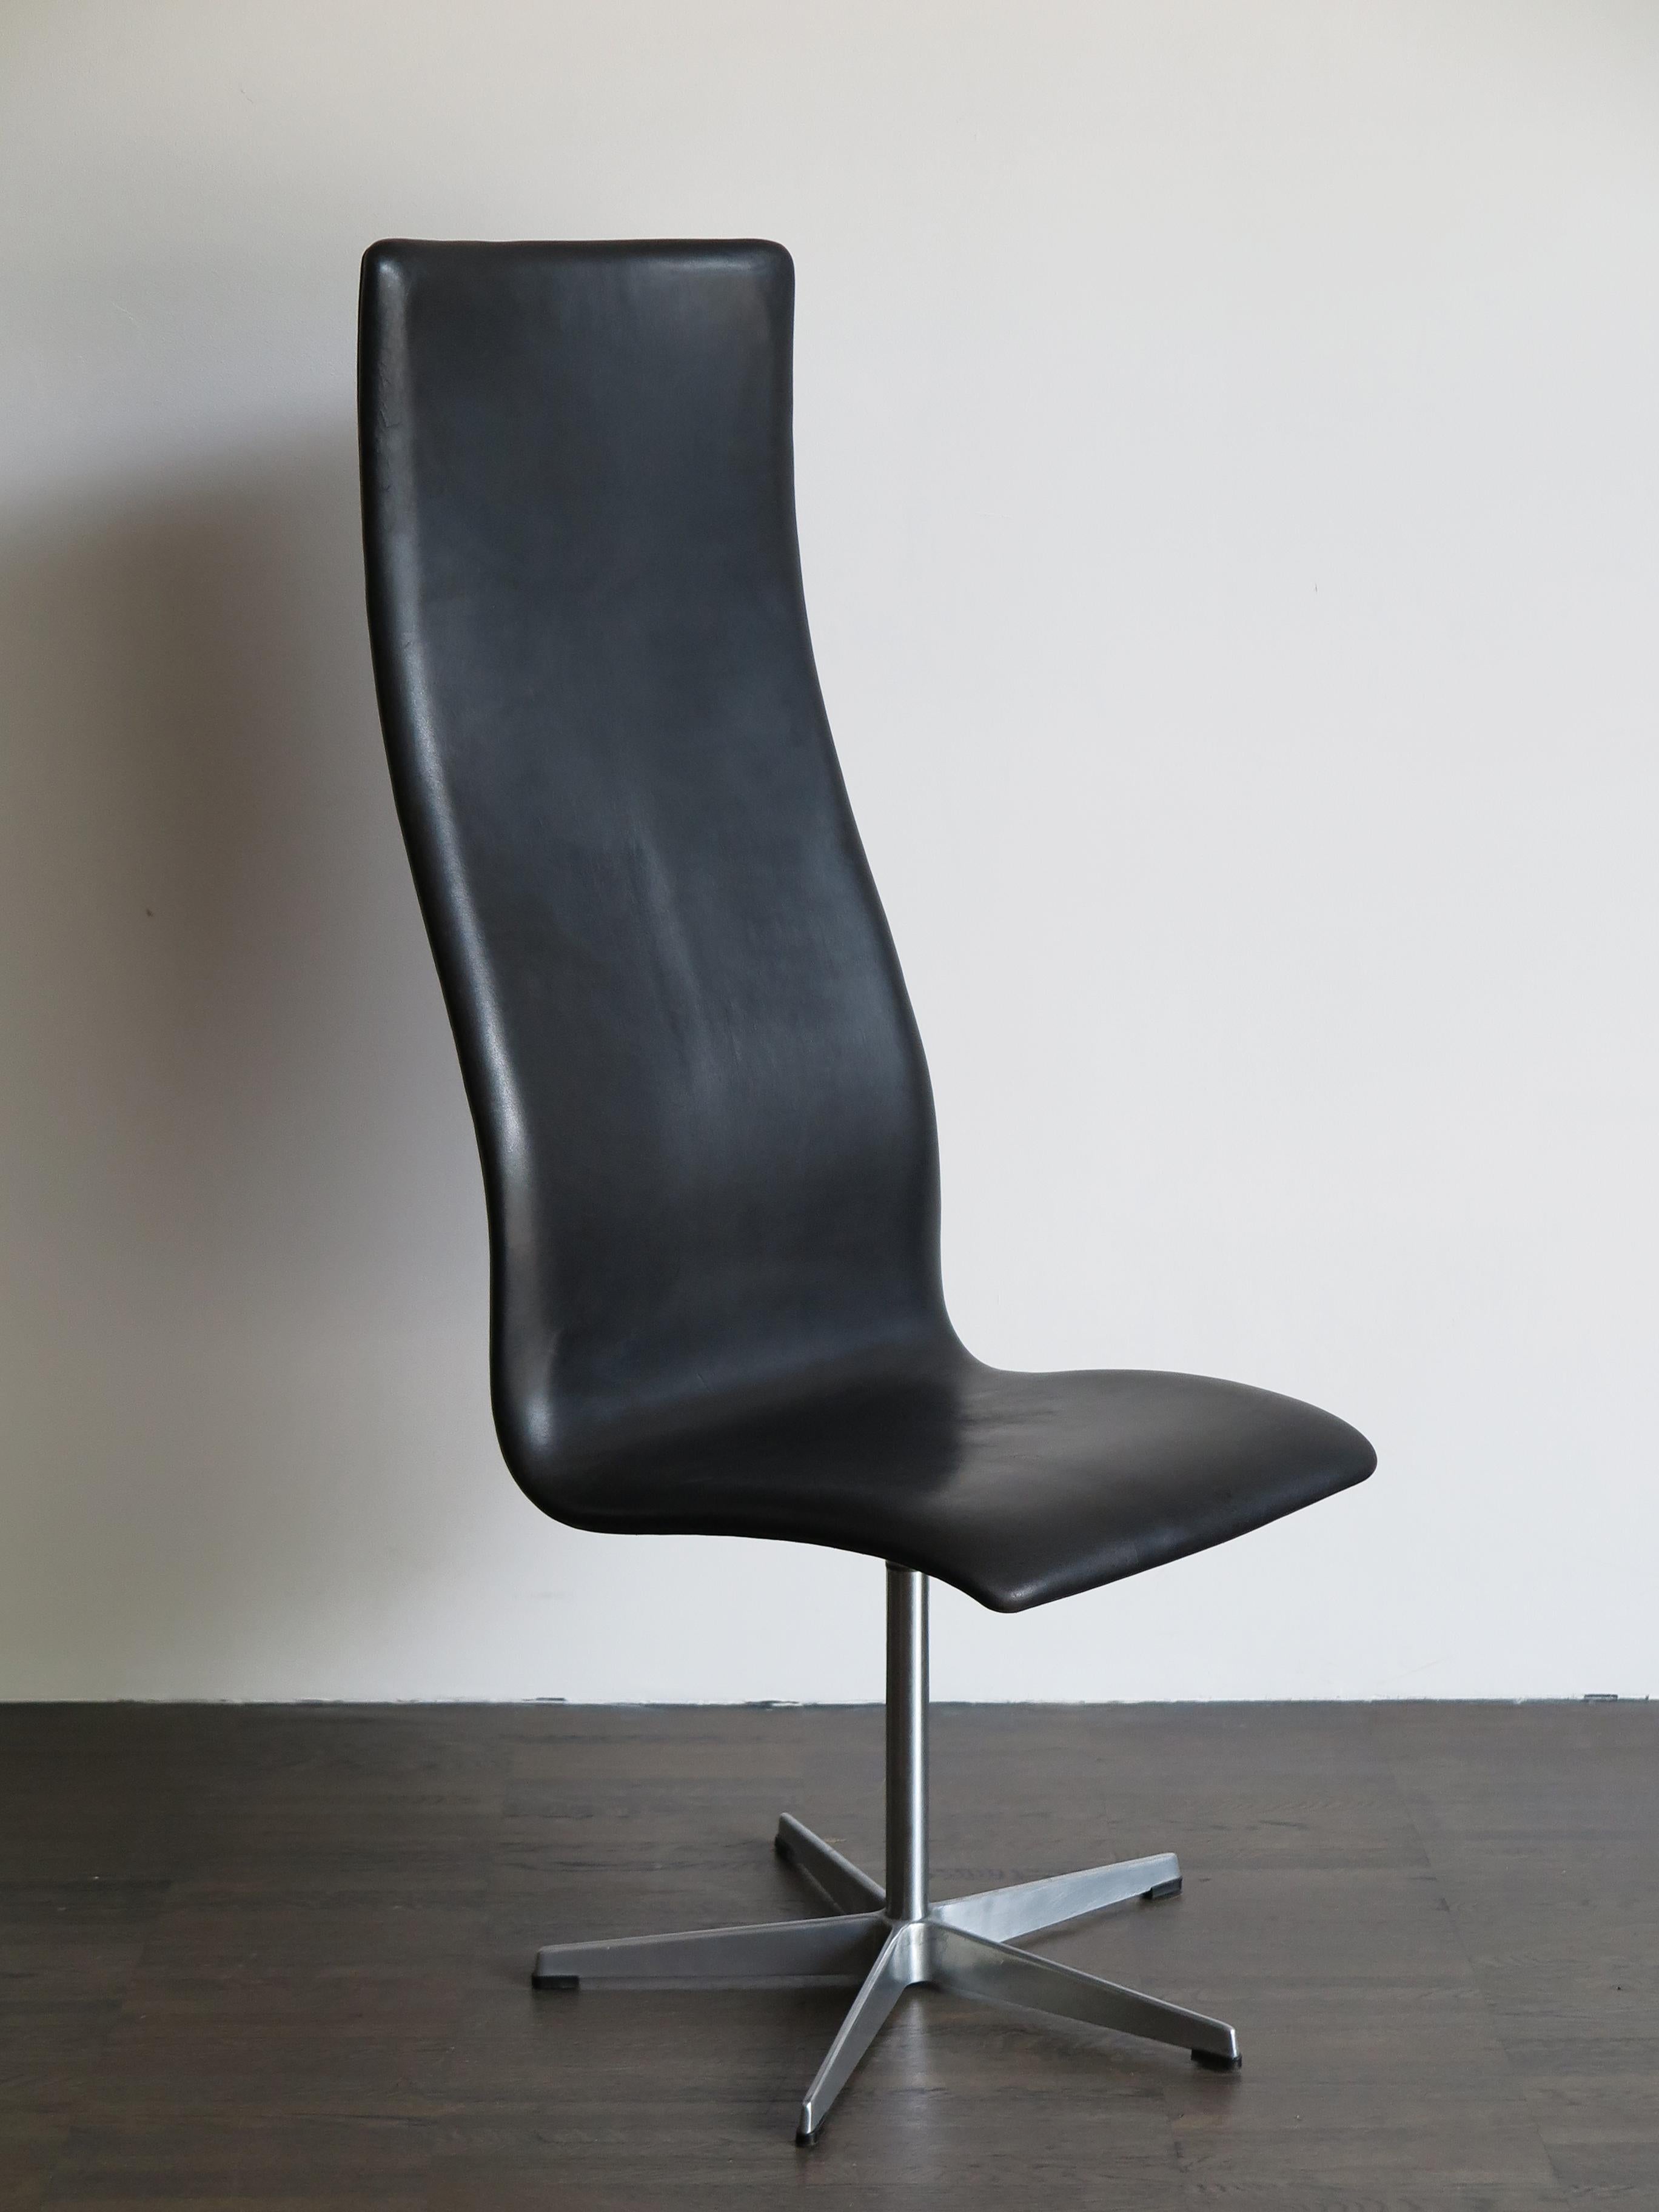 Danish Oxford Midcentury Black Leather Chairs by Arne Jacobsen for Fritz Hansen, 1960s For Sale